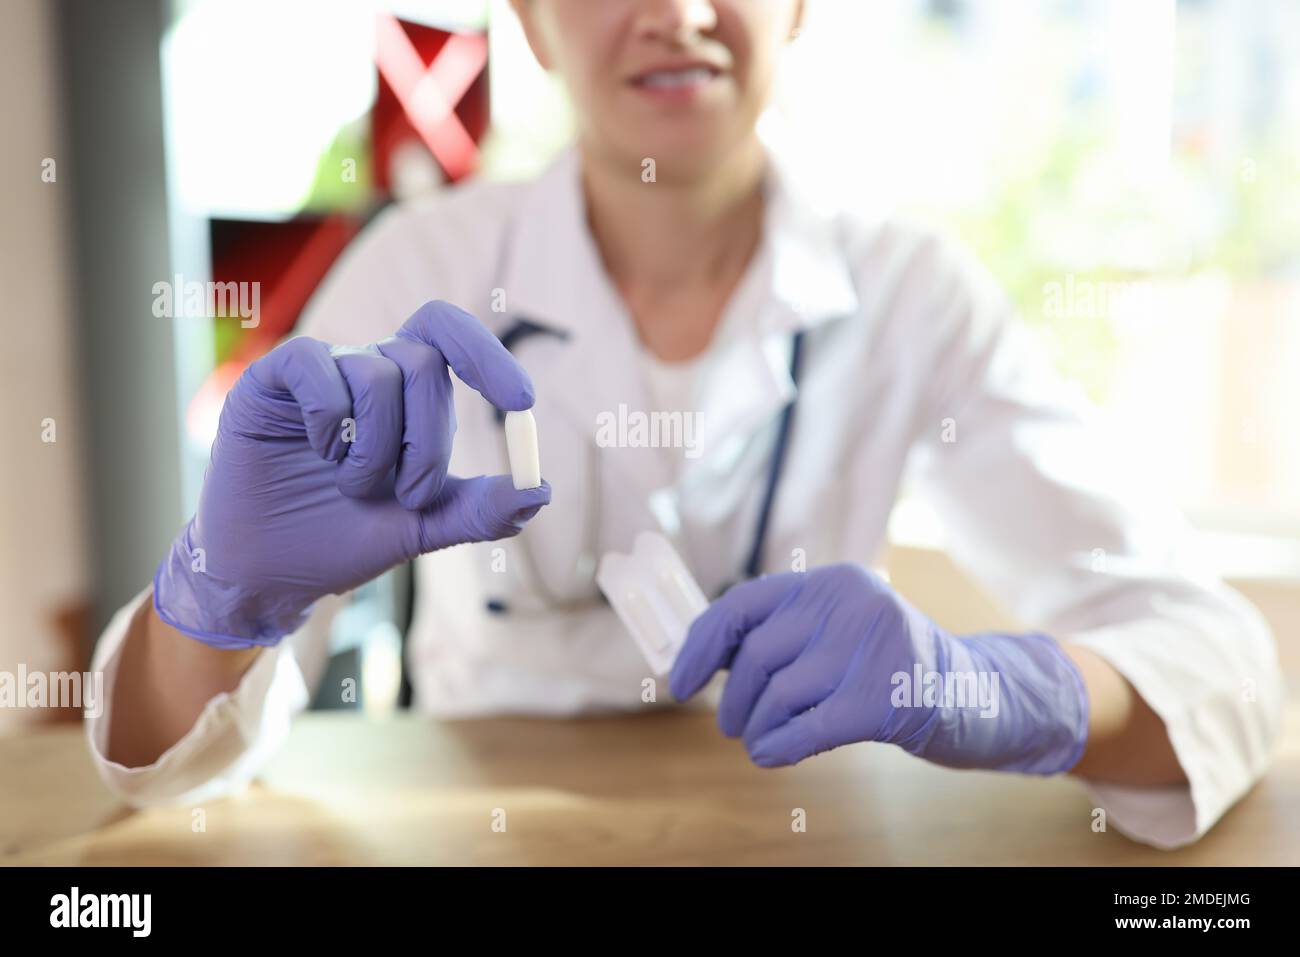 Doctor in latex gloves shows suppositories for anal or vaginal use. Stock Photo